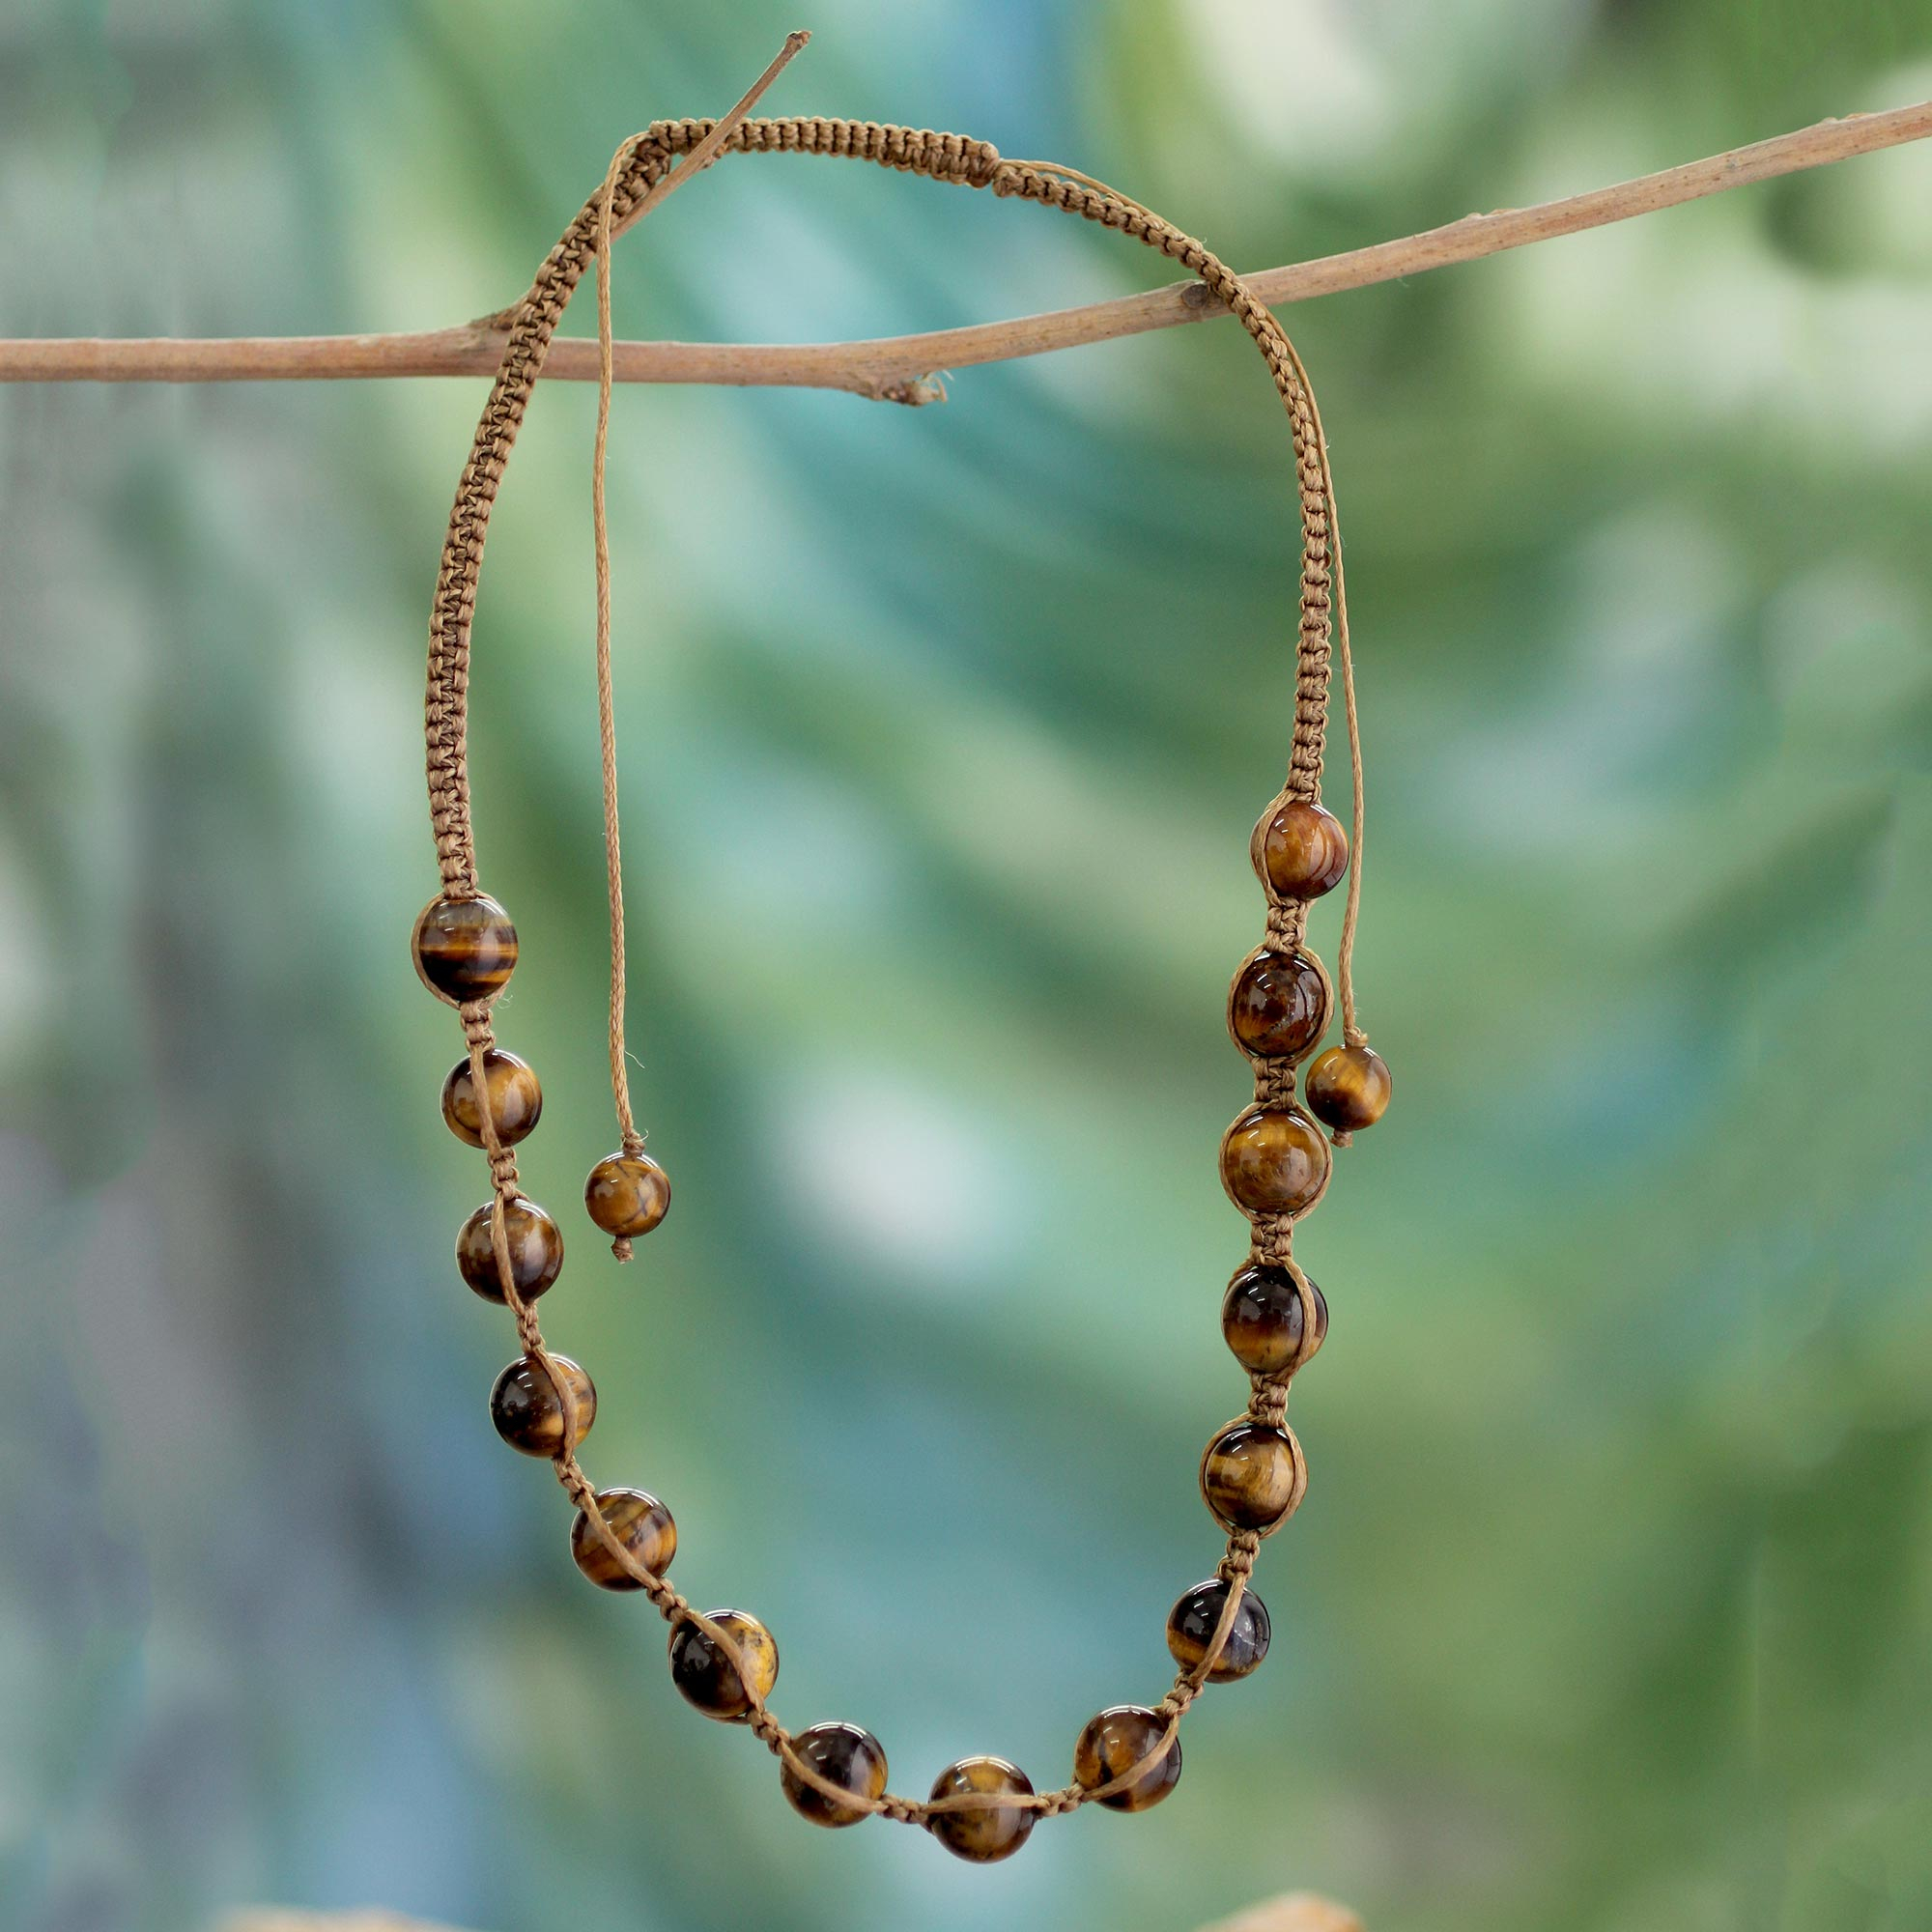 tigers eye necklace meaning